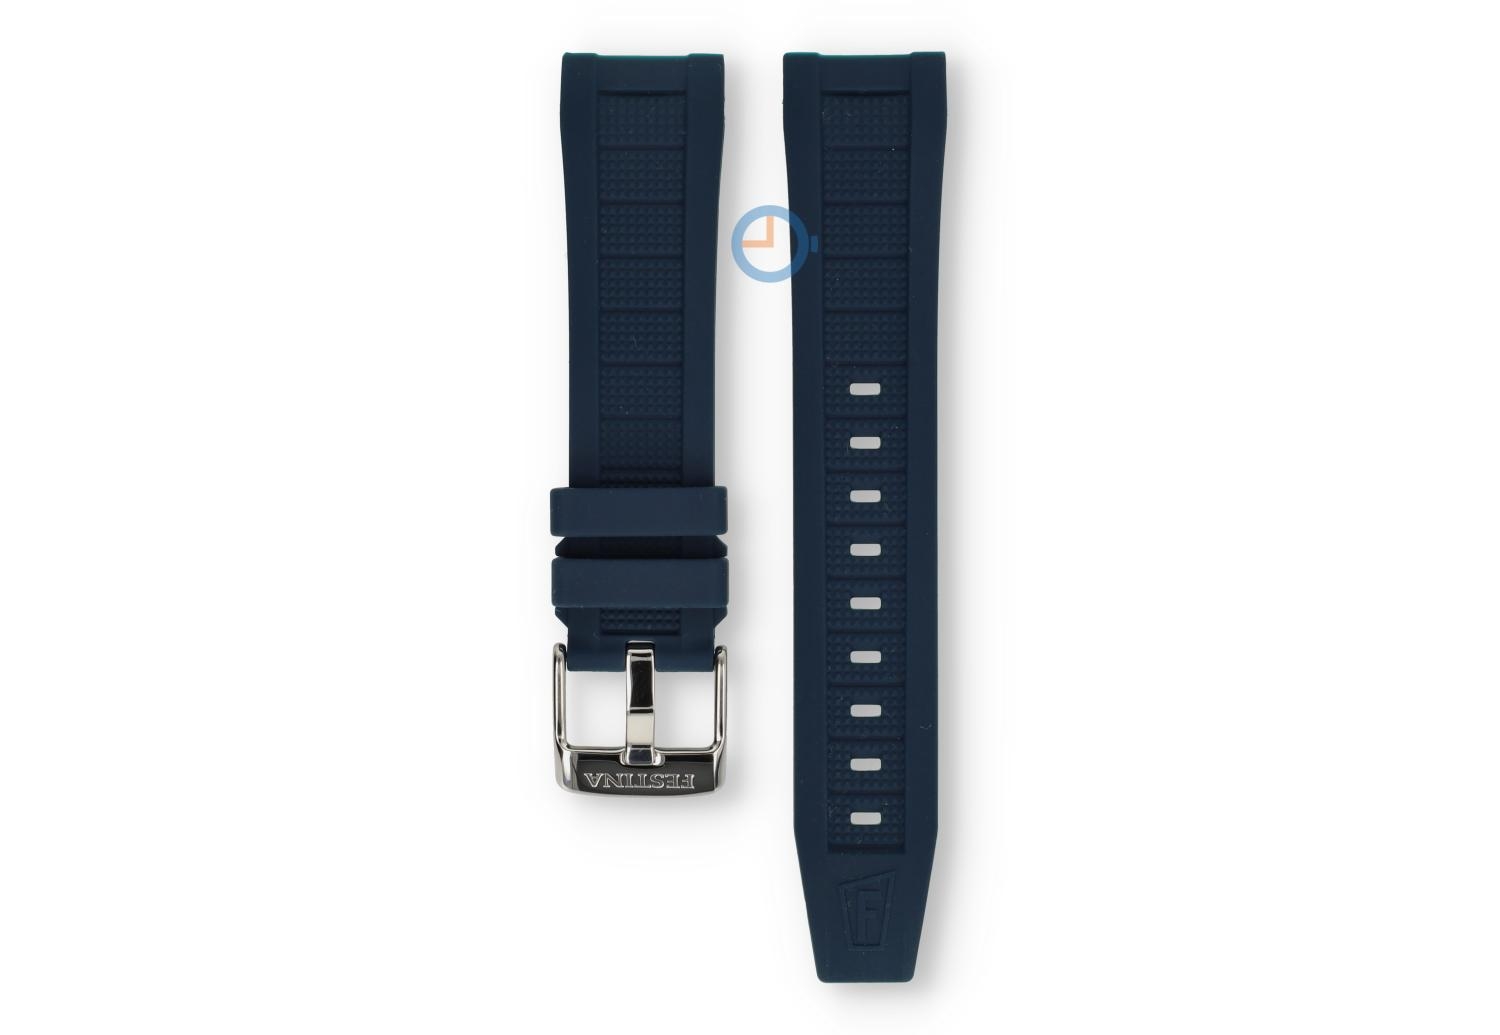 Festina watch straps at Watchstraponline.com • Easy and fast ordered online!